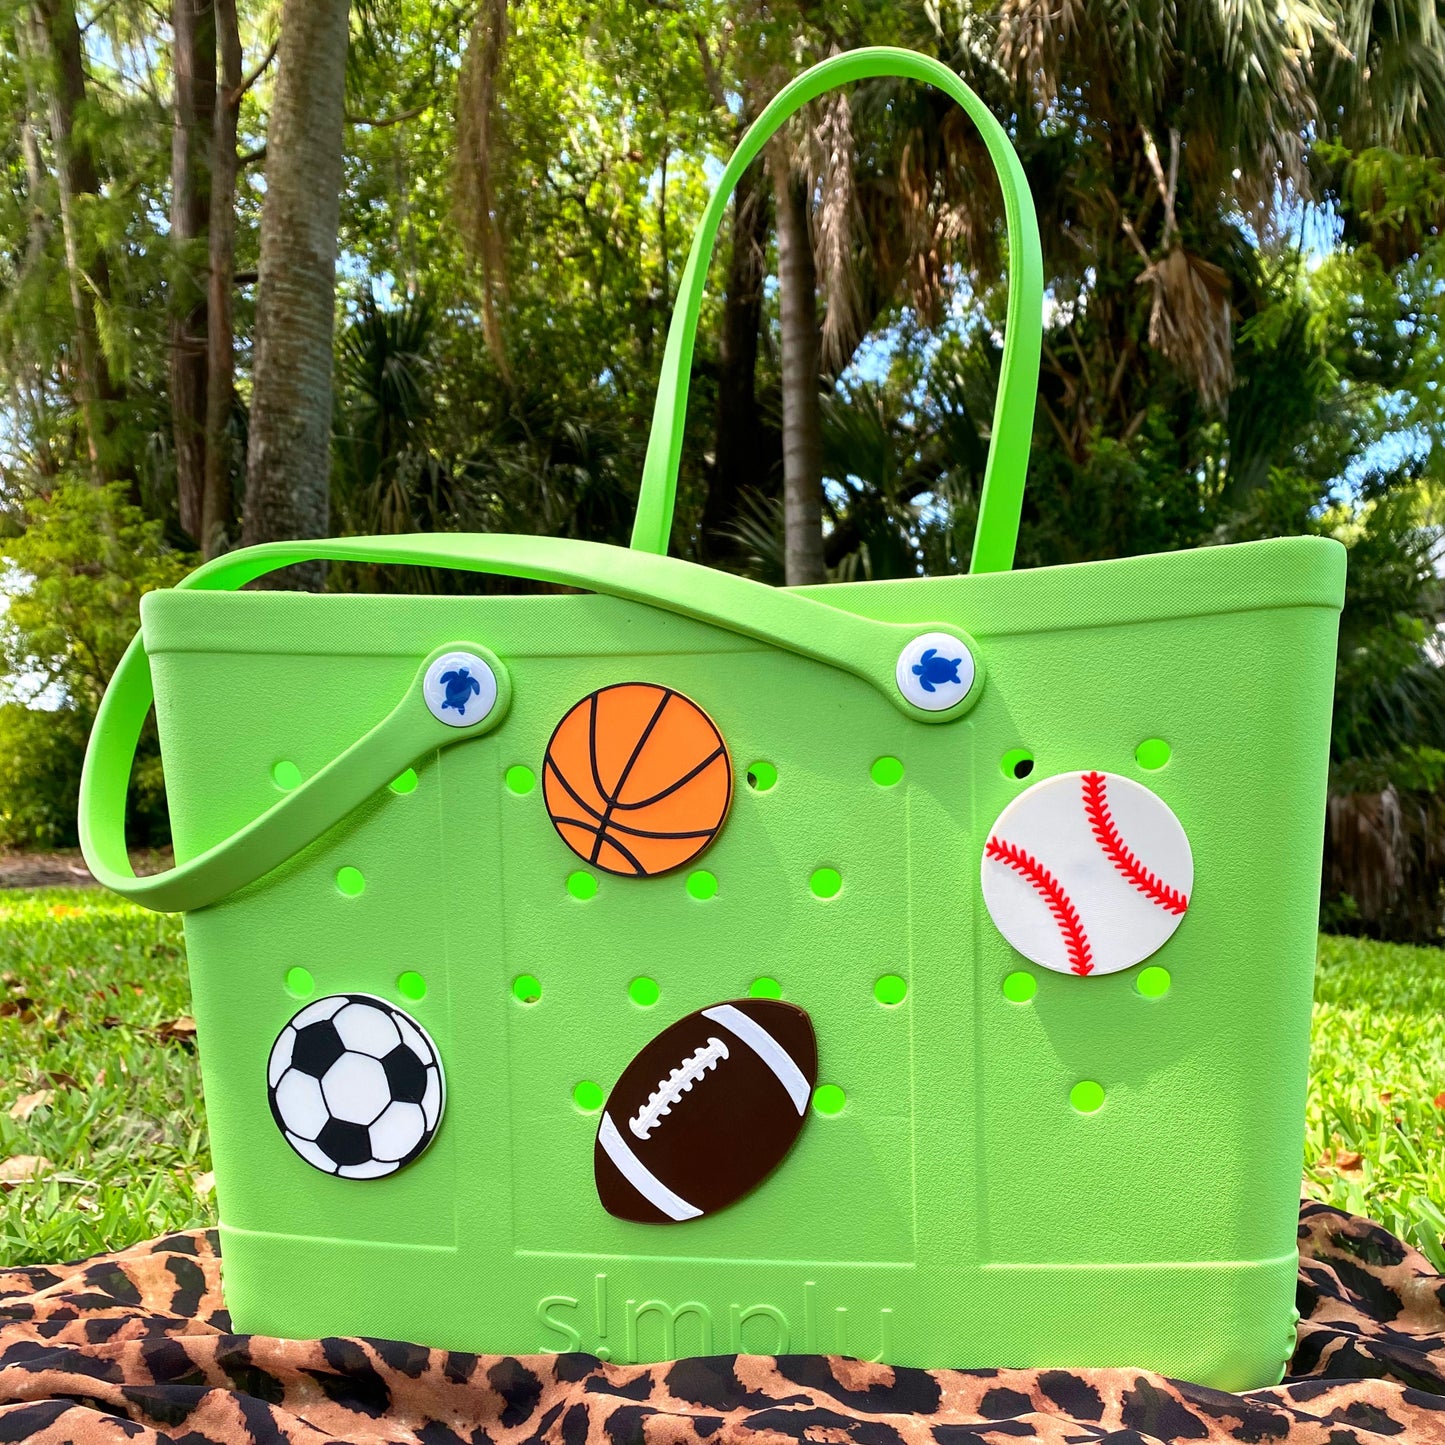 Sports Charm for Bogg Bag, Simply Southern Totes, and Similar